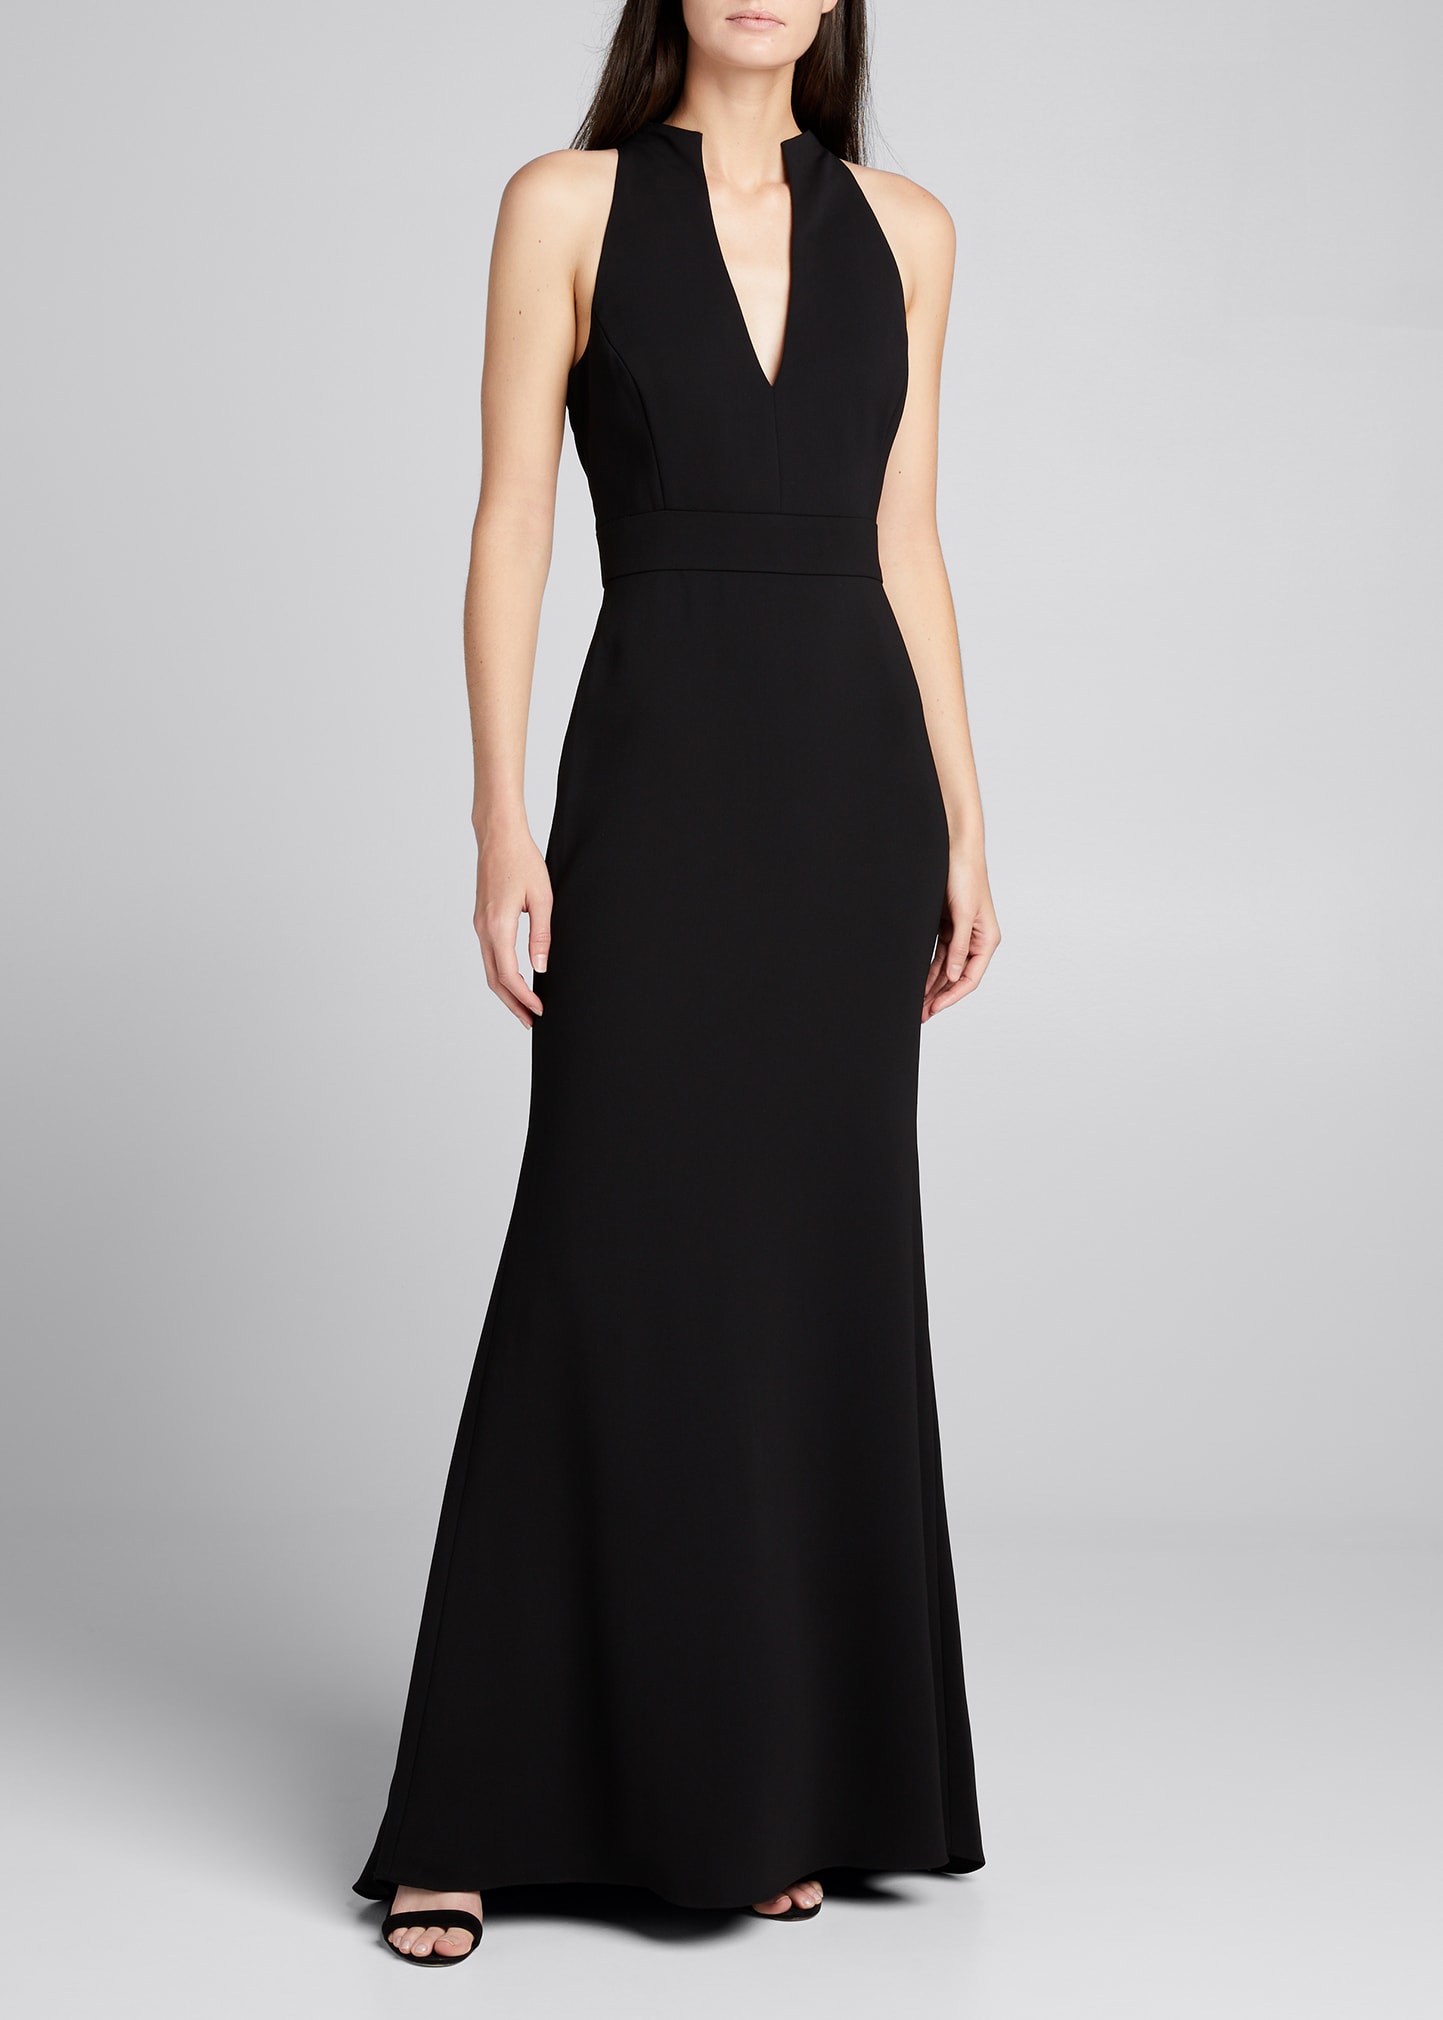 Badgley Mischka Collection V-Neck Column Gown with Cut-In Shoulders